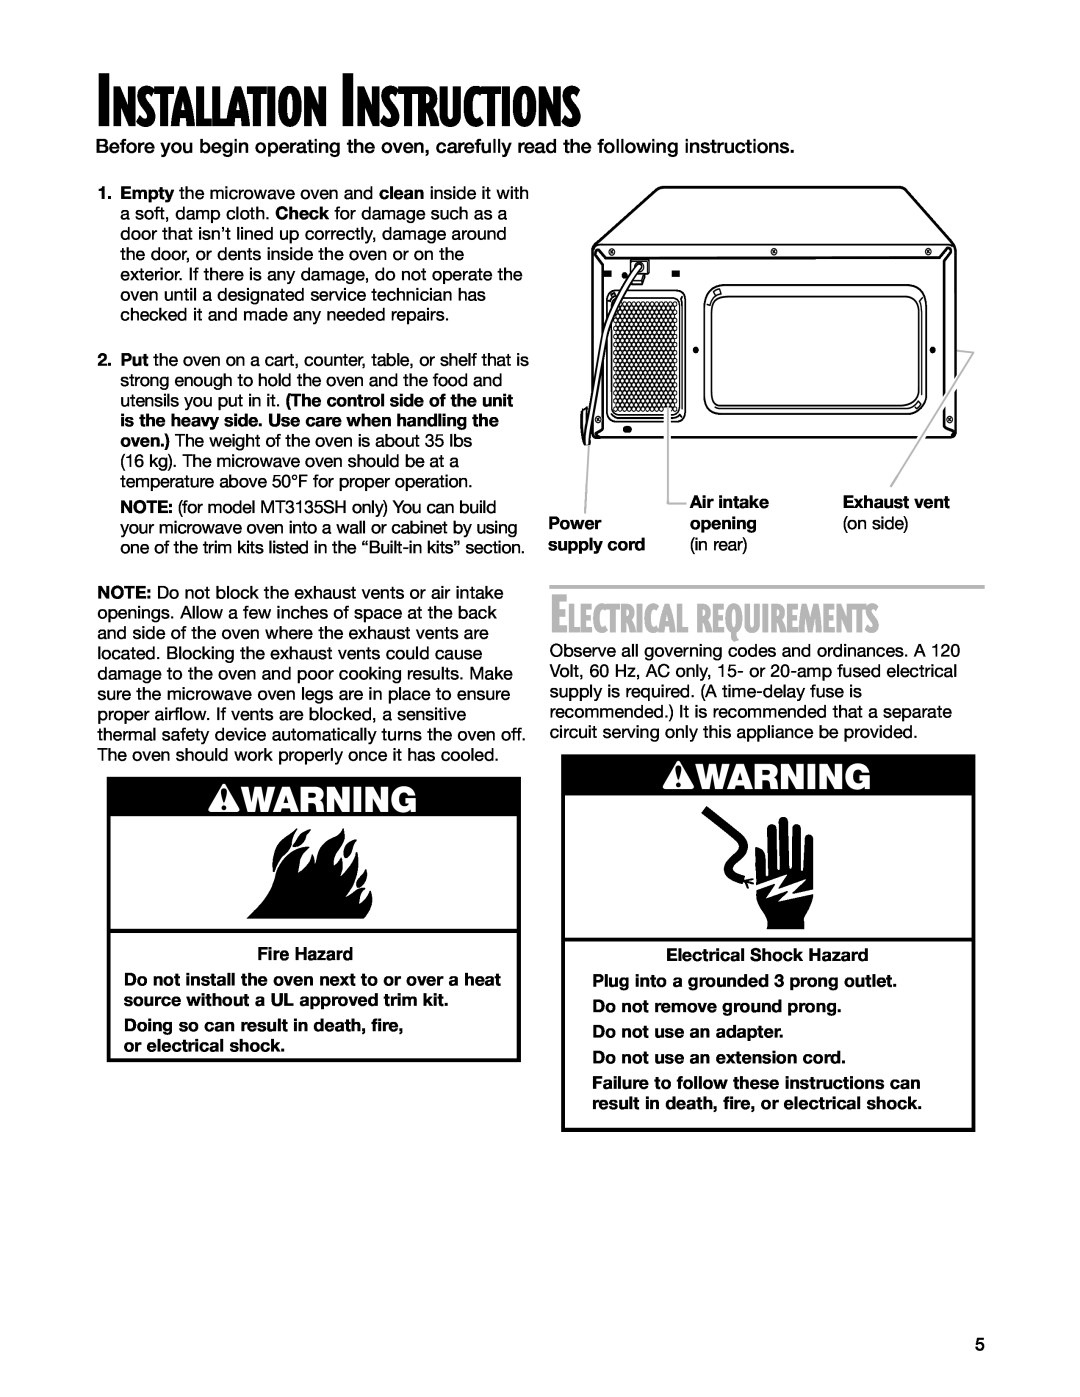 Whirlpool MT3105SH, MT3135SH wWARNING, Electrical Requirements, Fire Hazard, Installation Instructions 